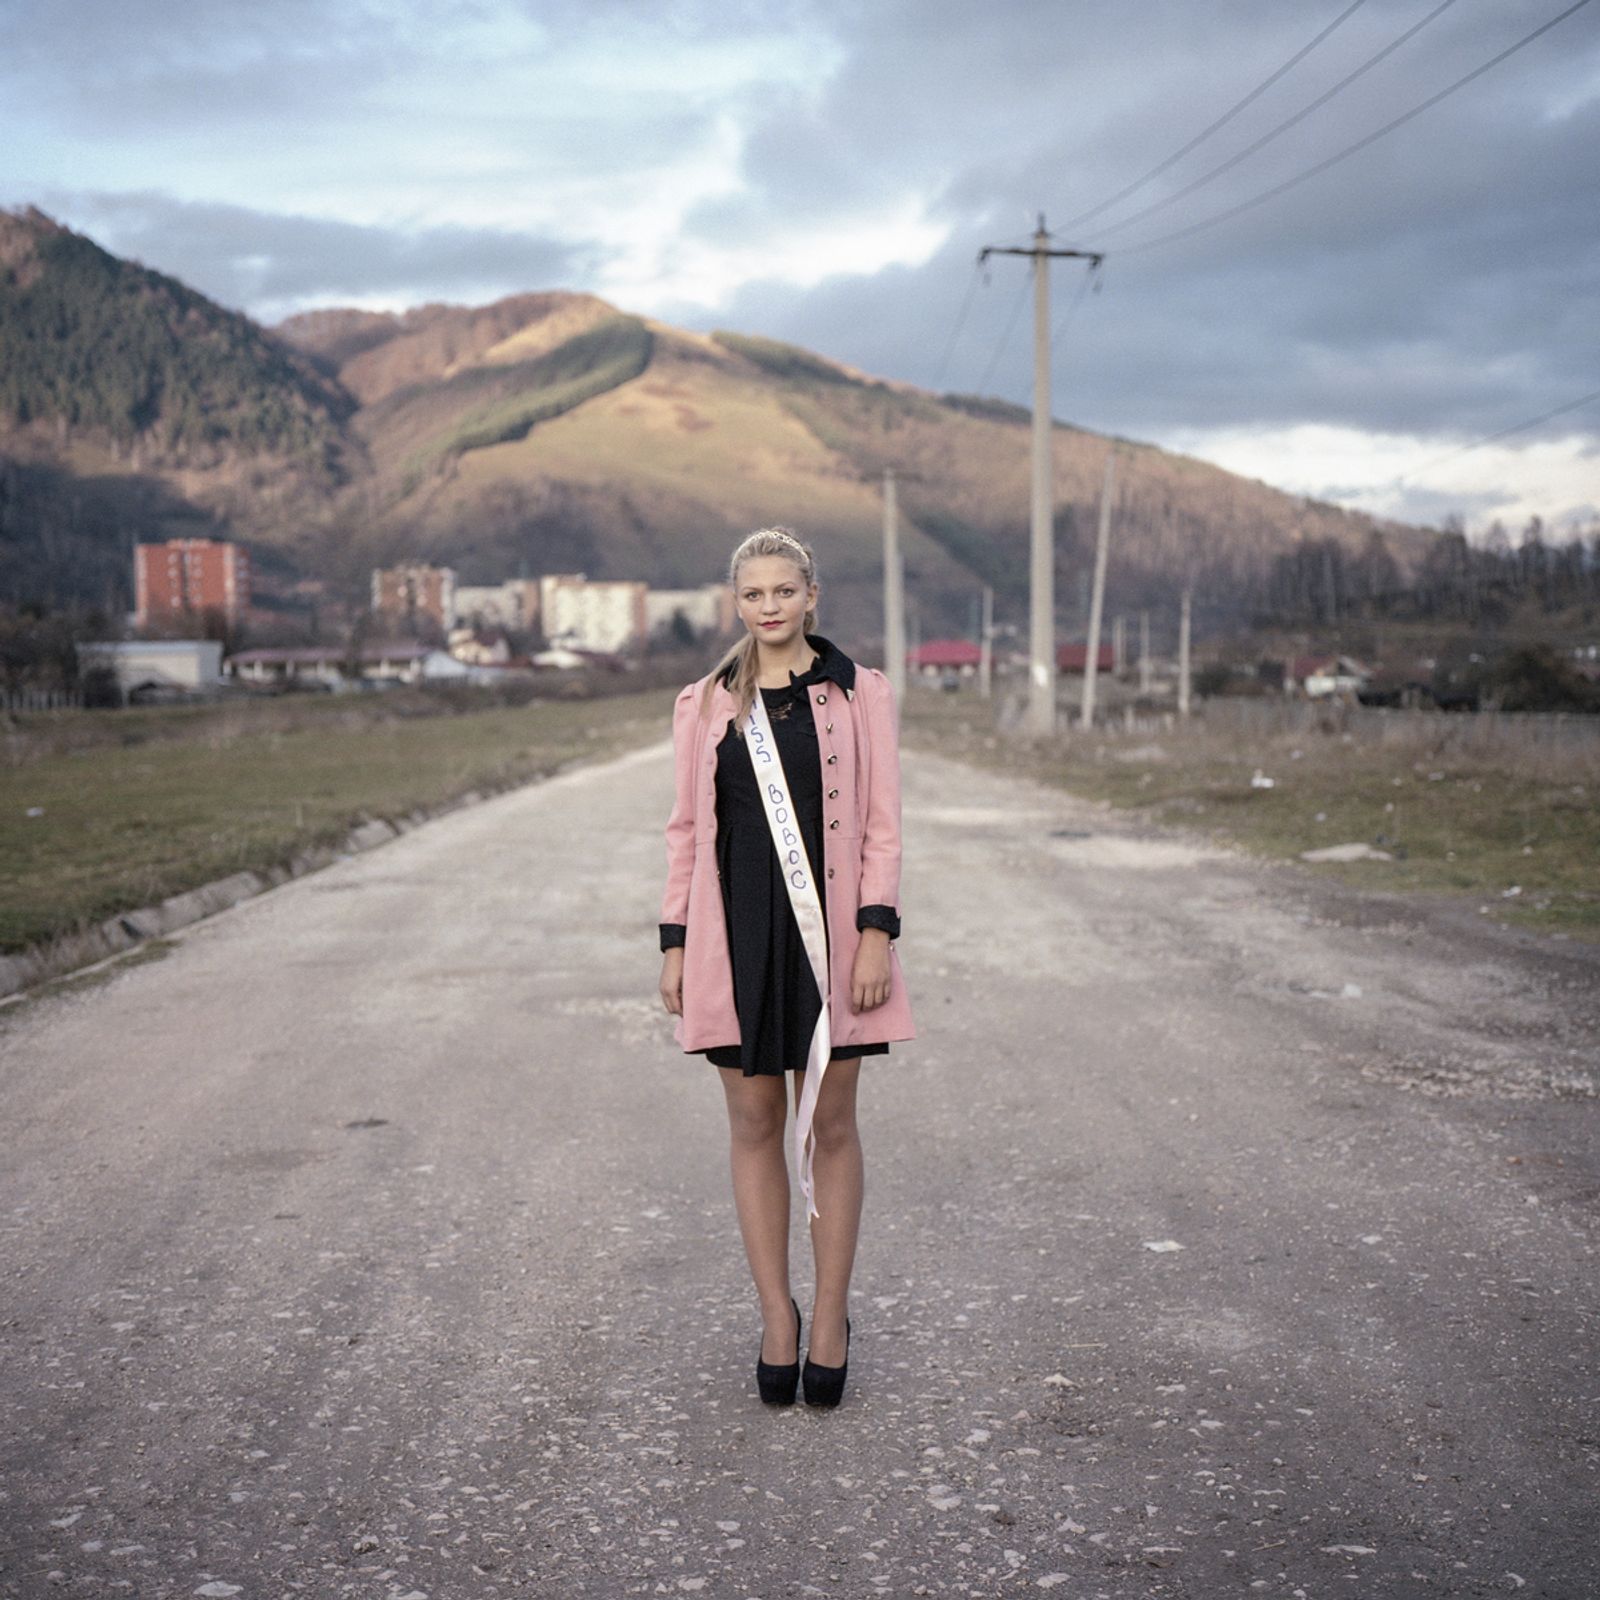 © Ioana Cirlig - Image from the Post-industrial stories photography project